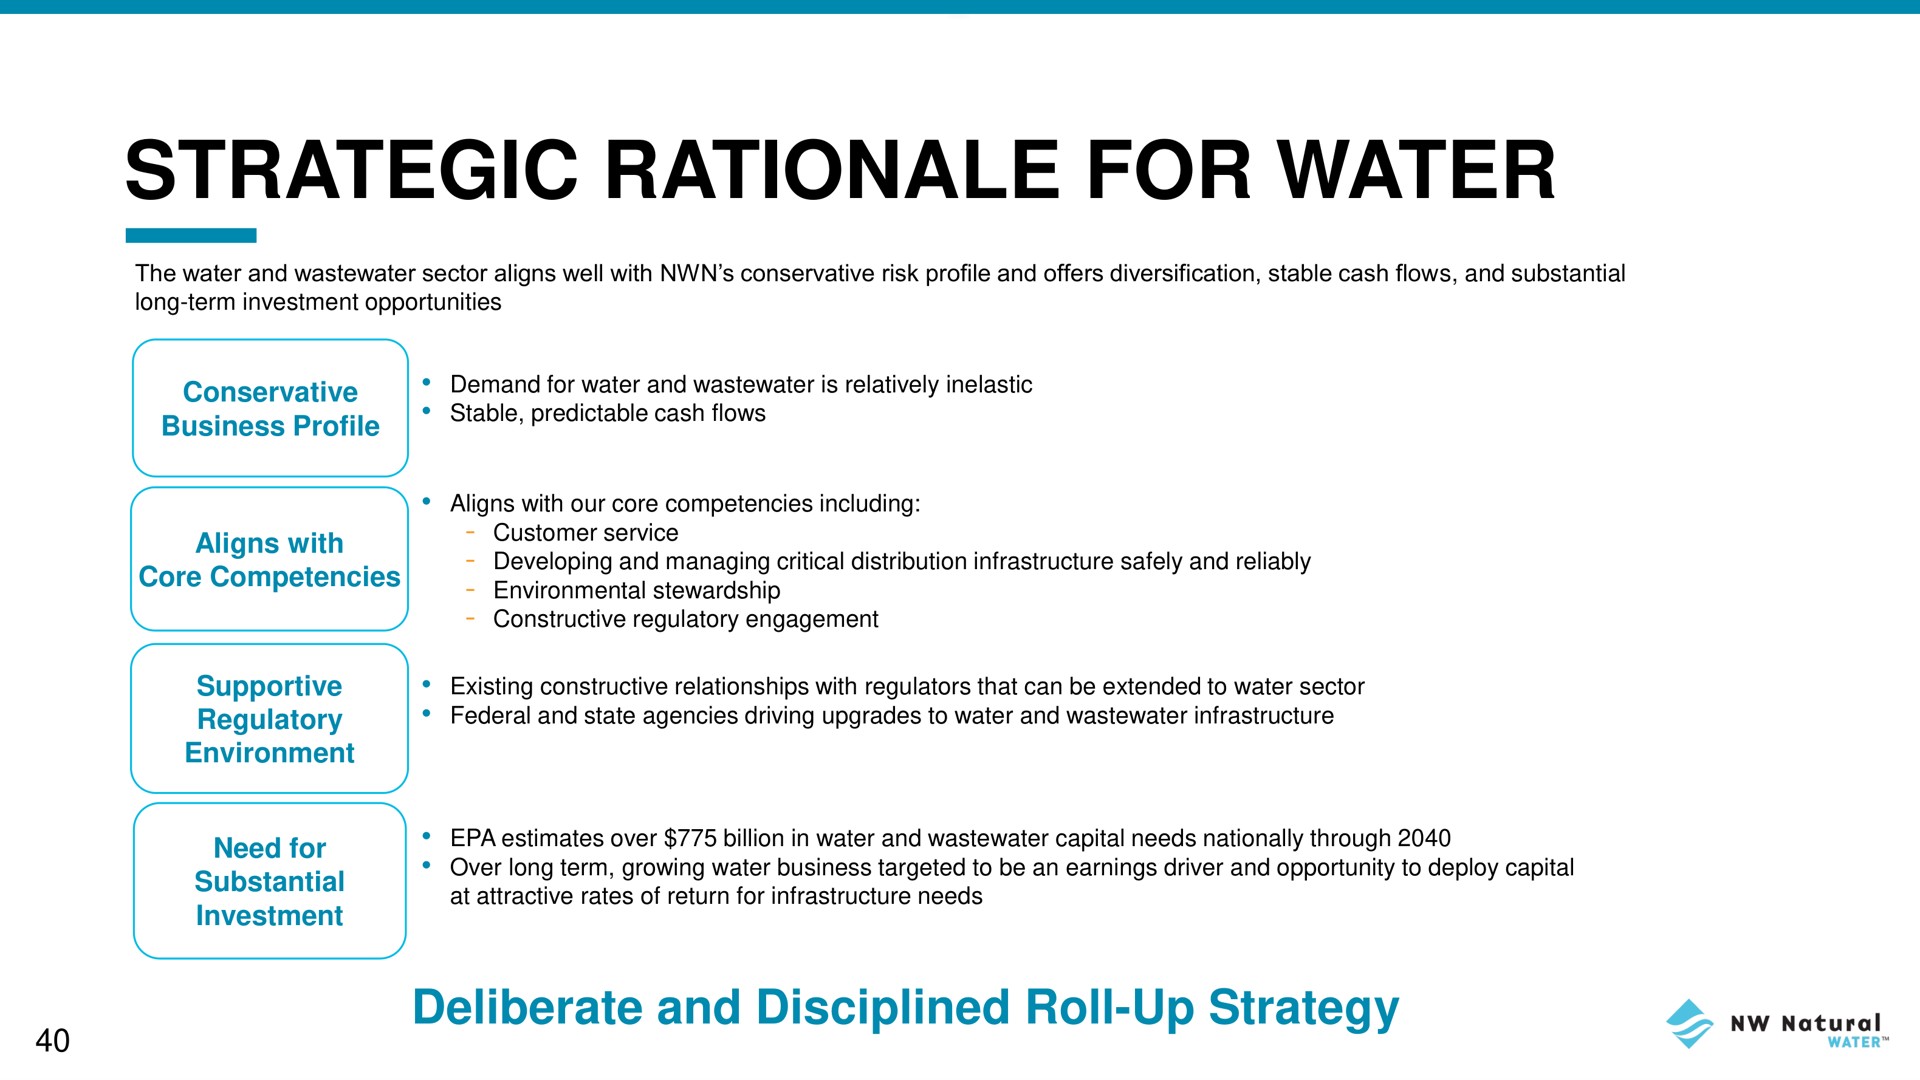 strategic rationale for water | NW Natural Holdings